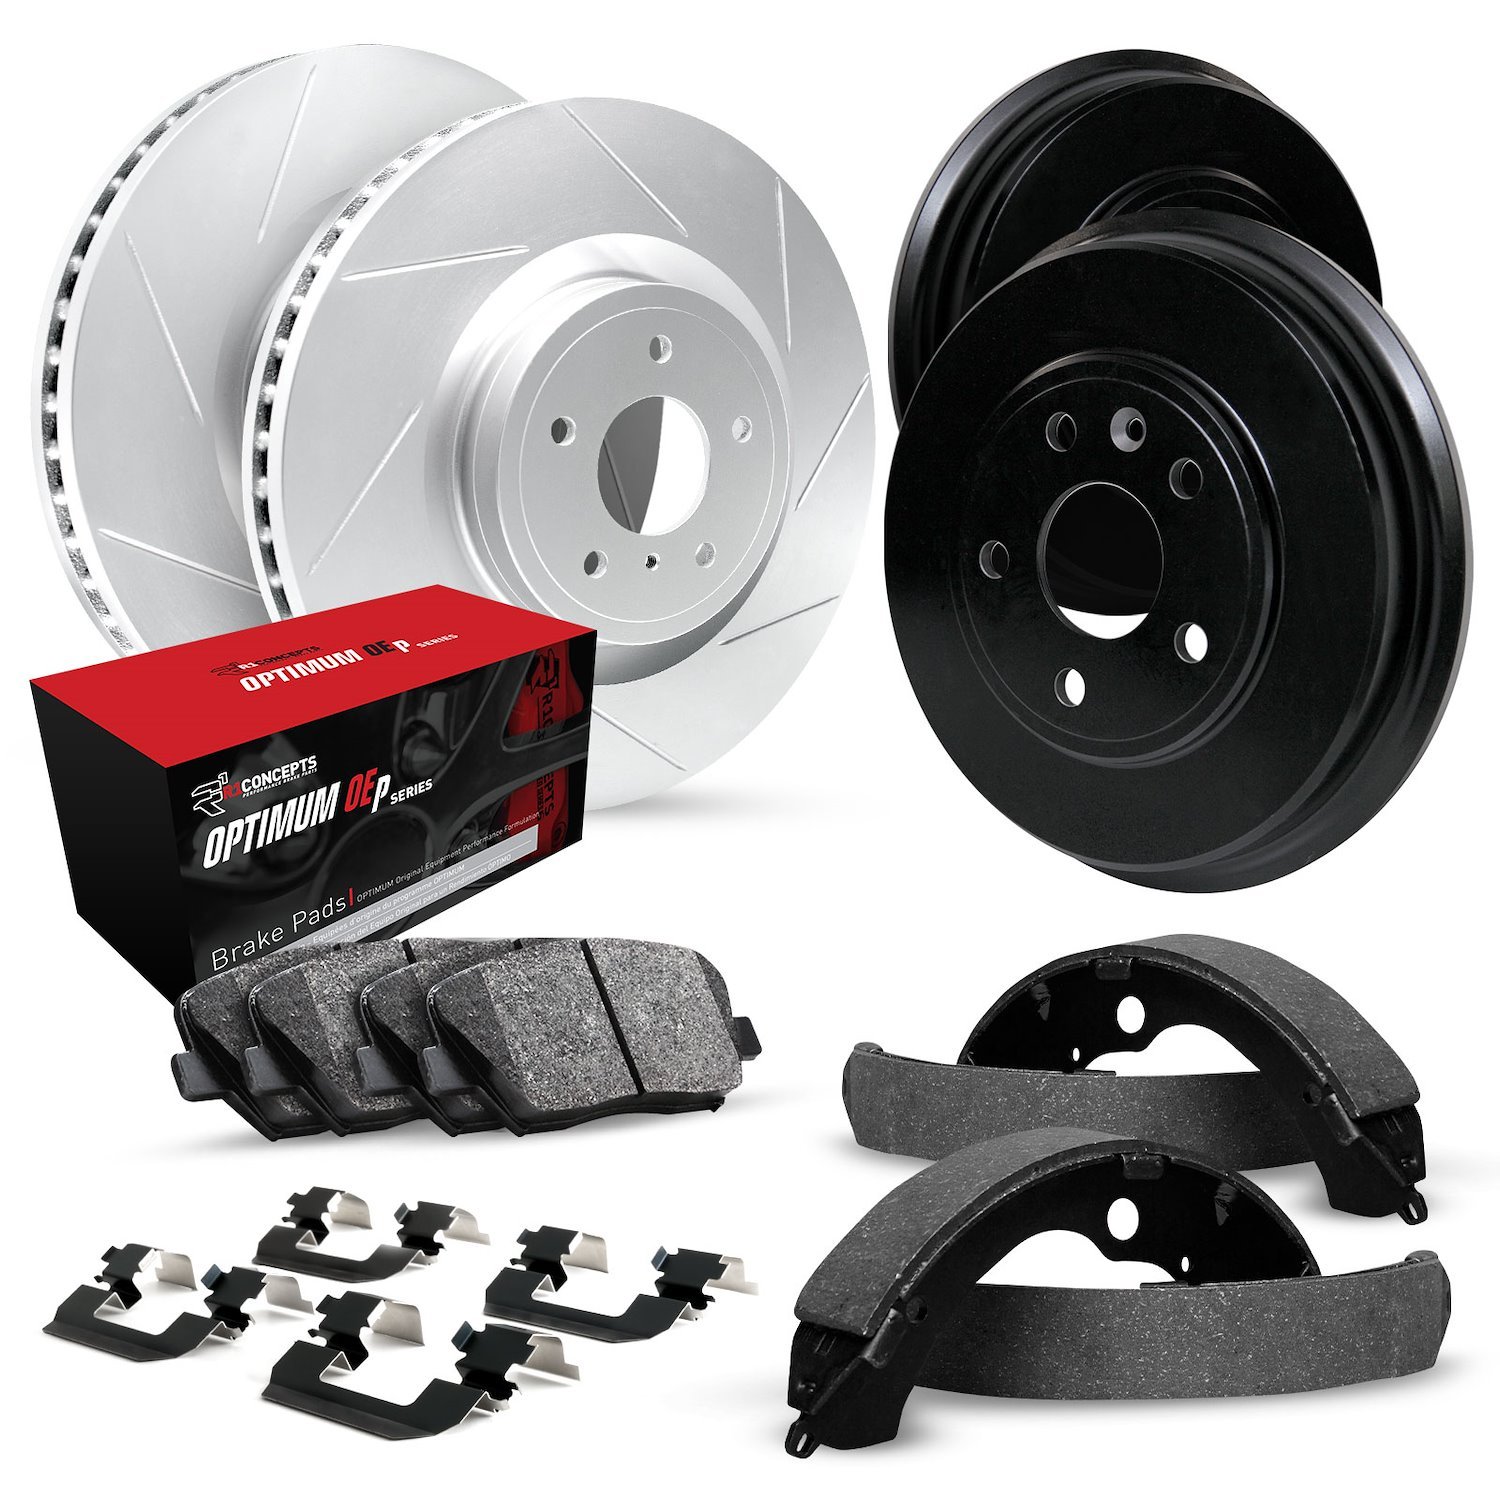 GEO-Carbon Slotted Brake Rotor & Drum Set w/Optimum OE Pads, Shoes, & Hardware, 1990-1990 GM, Position: Front & Rear